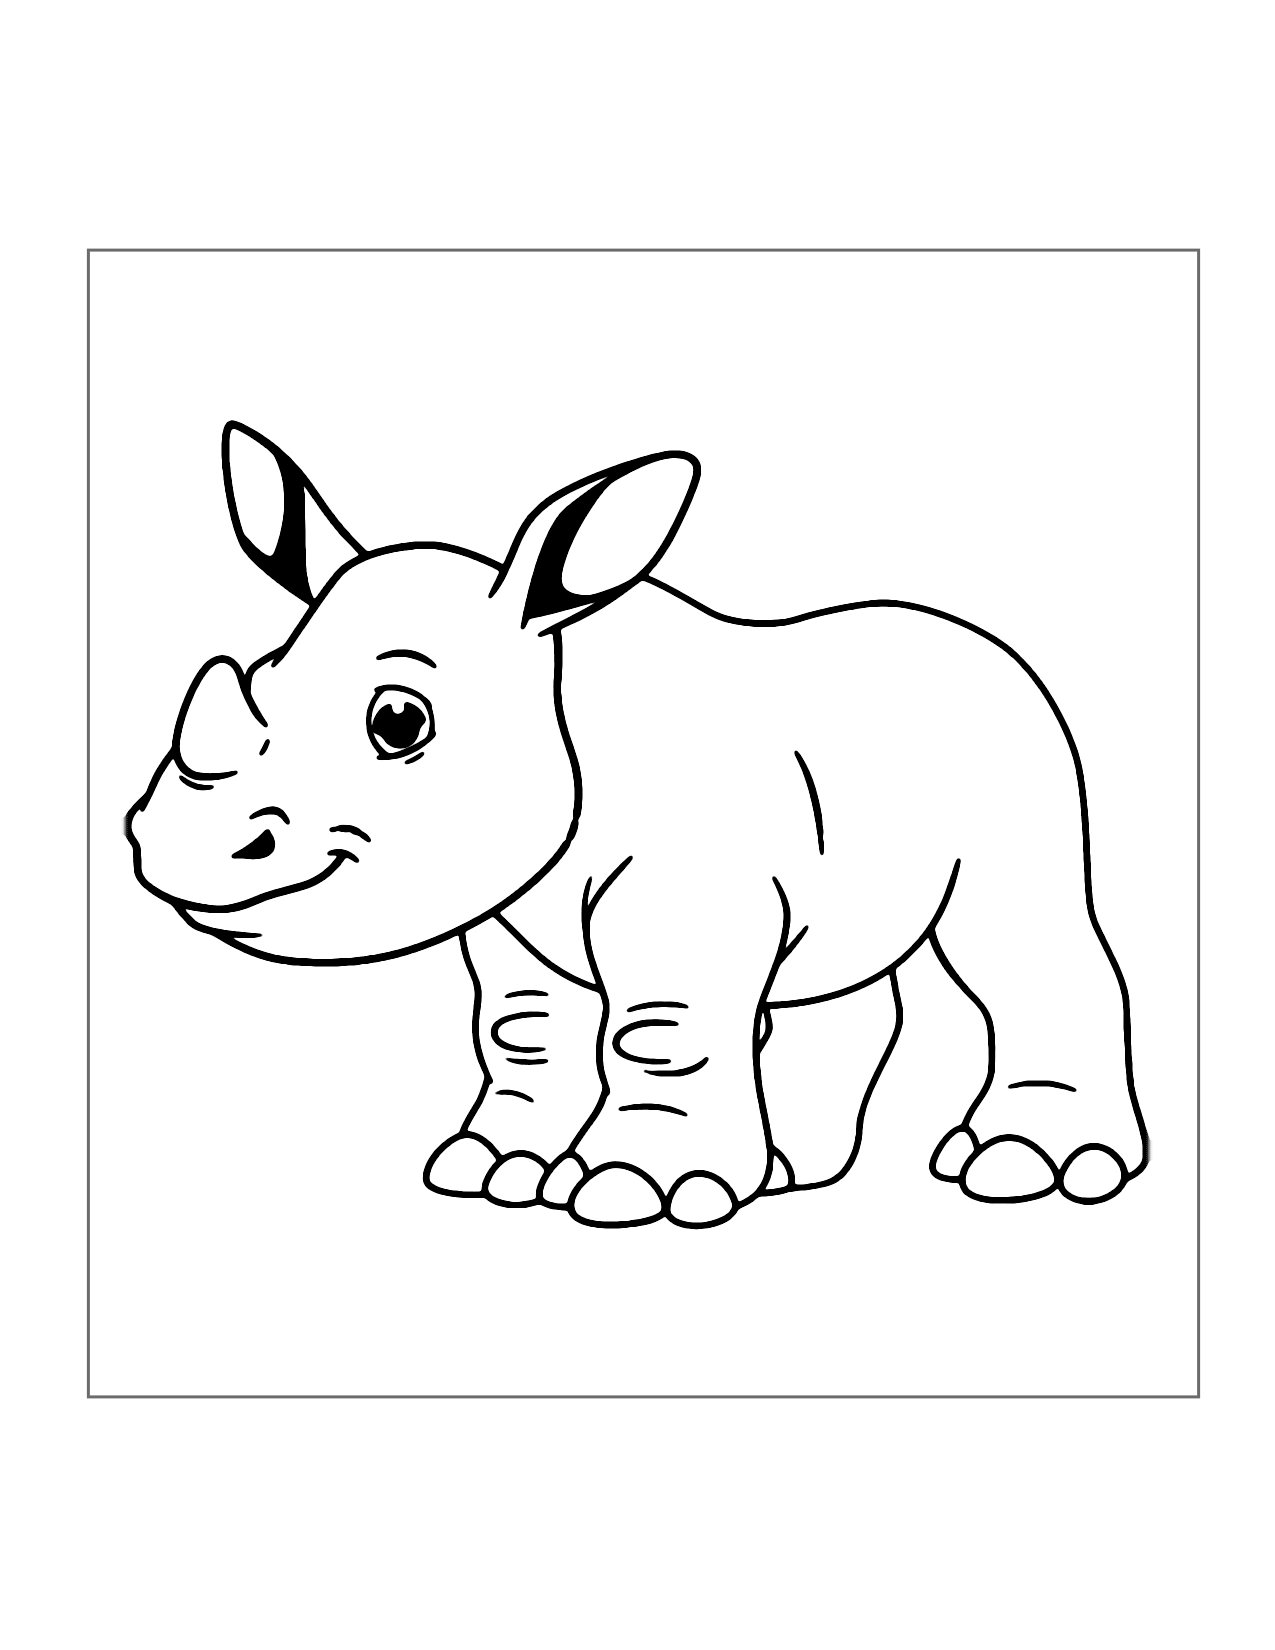 Cute Baby Rhino Coloring Page